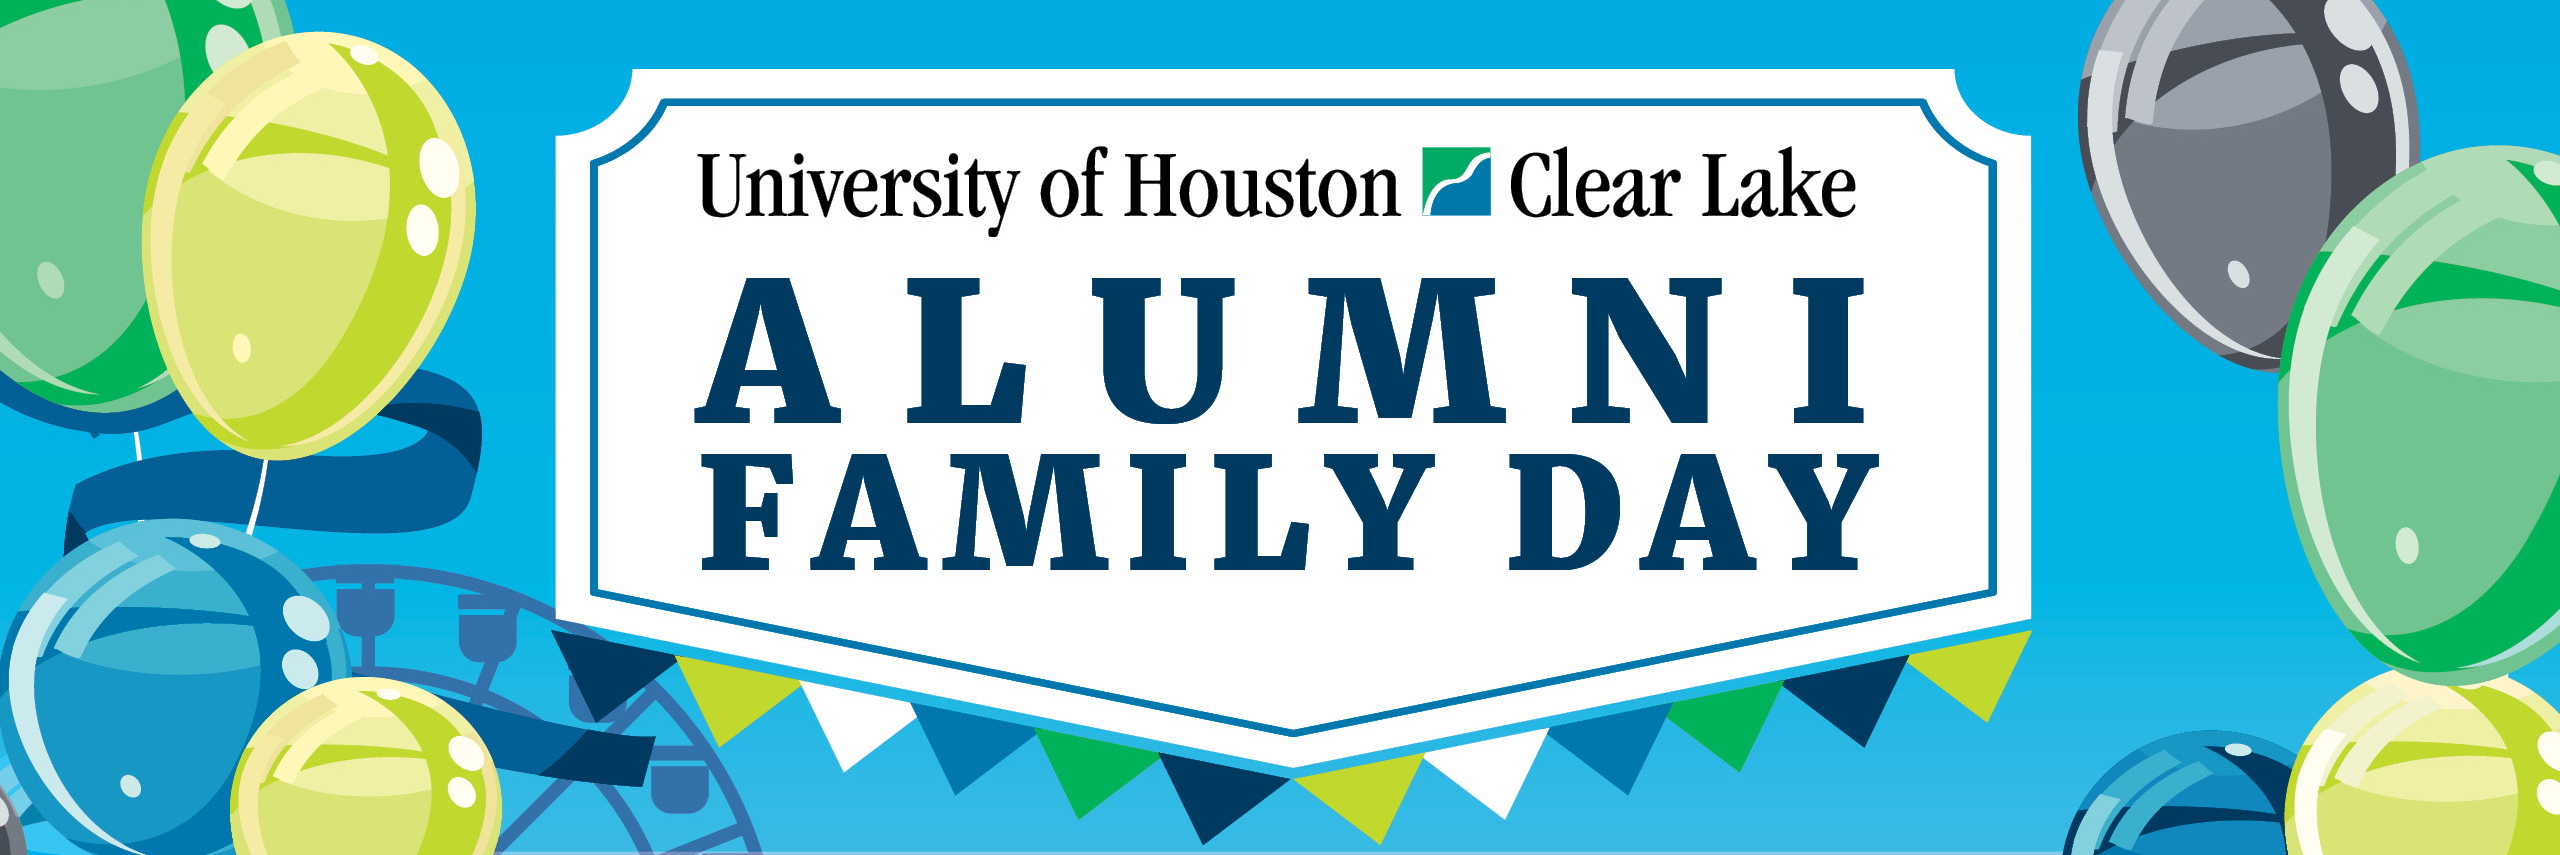 alumni family day graphic with balloons and carnival decor